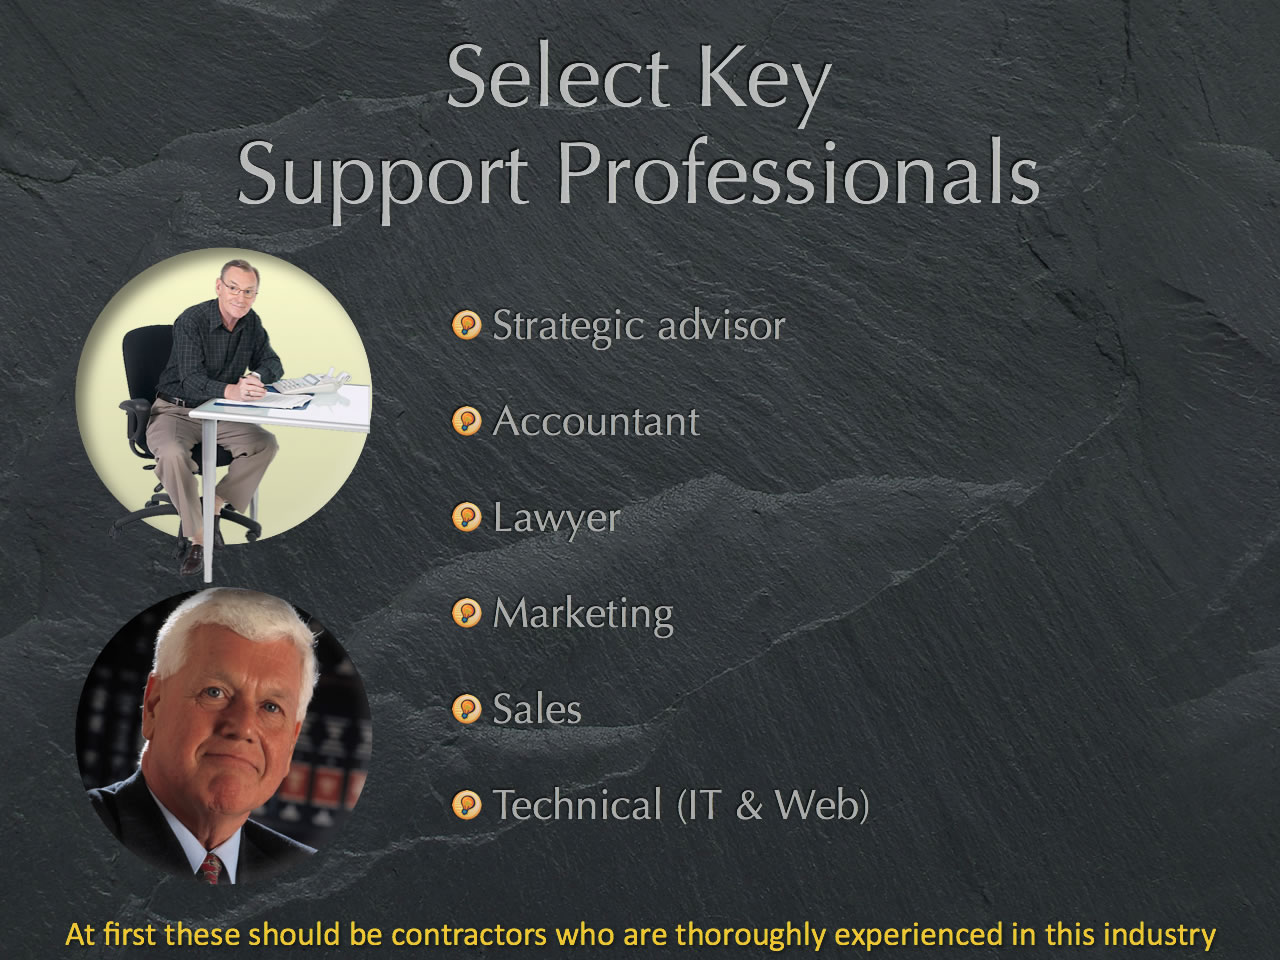 Select key support staff like advisors, accountant, lawyer, marketing, sales, technical